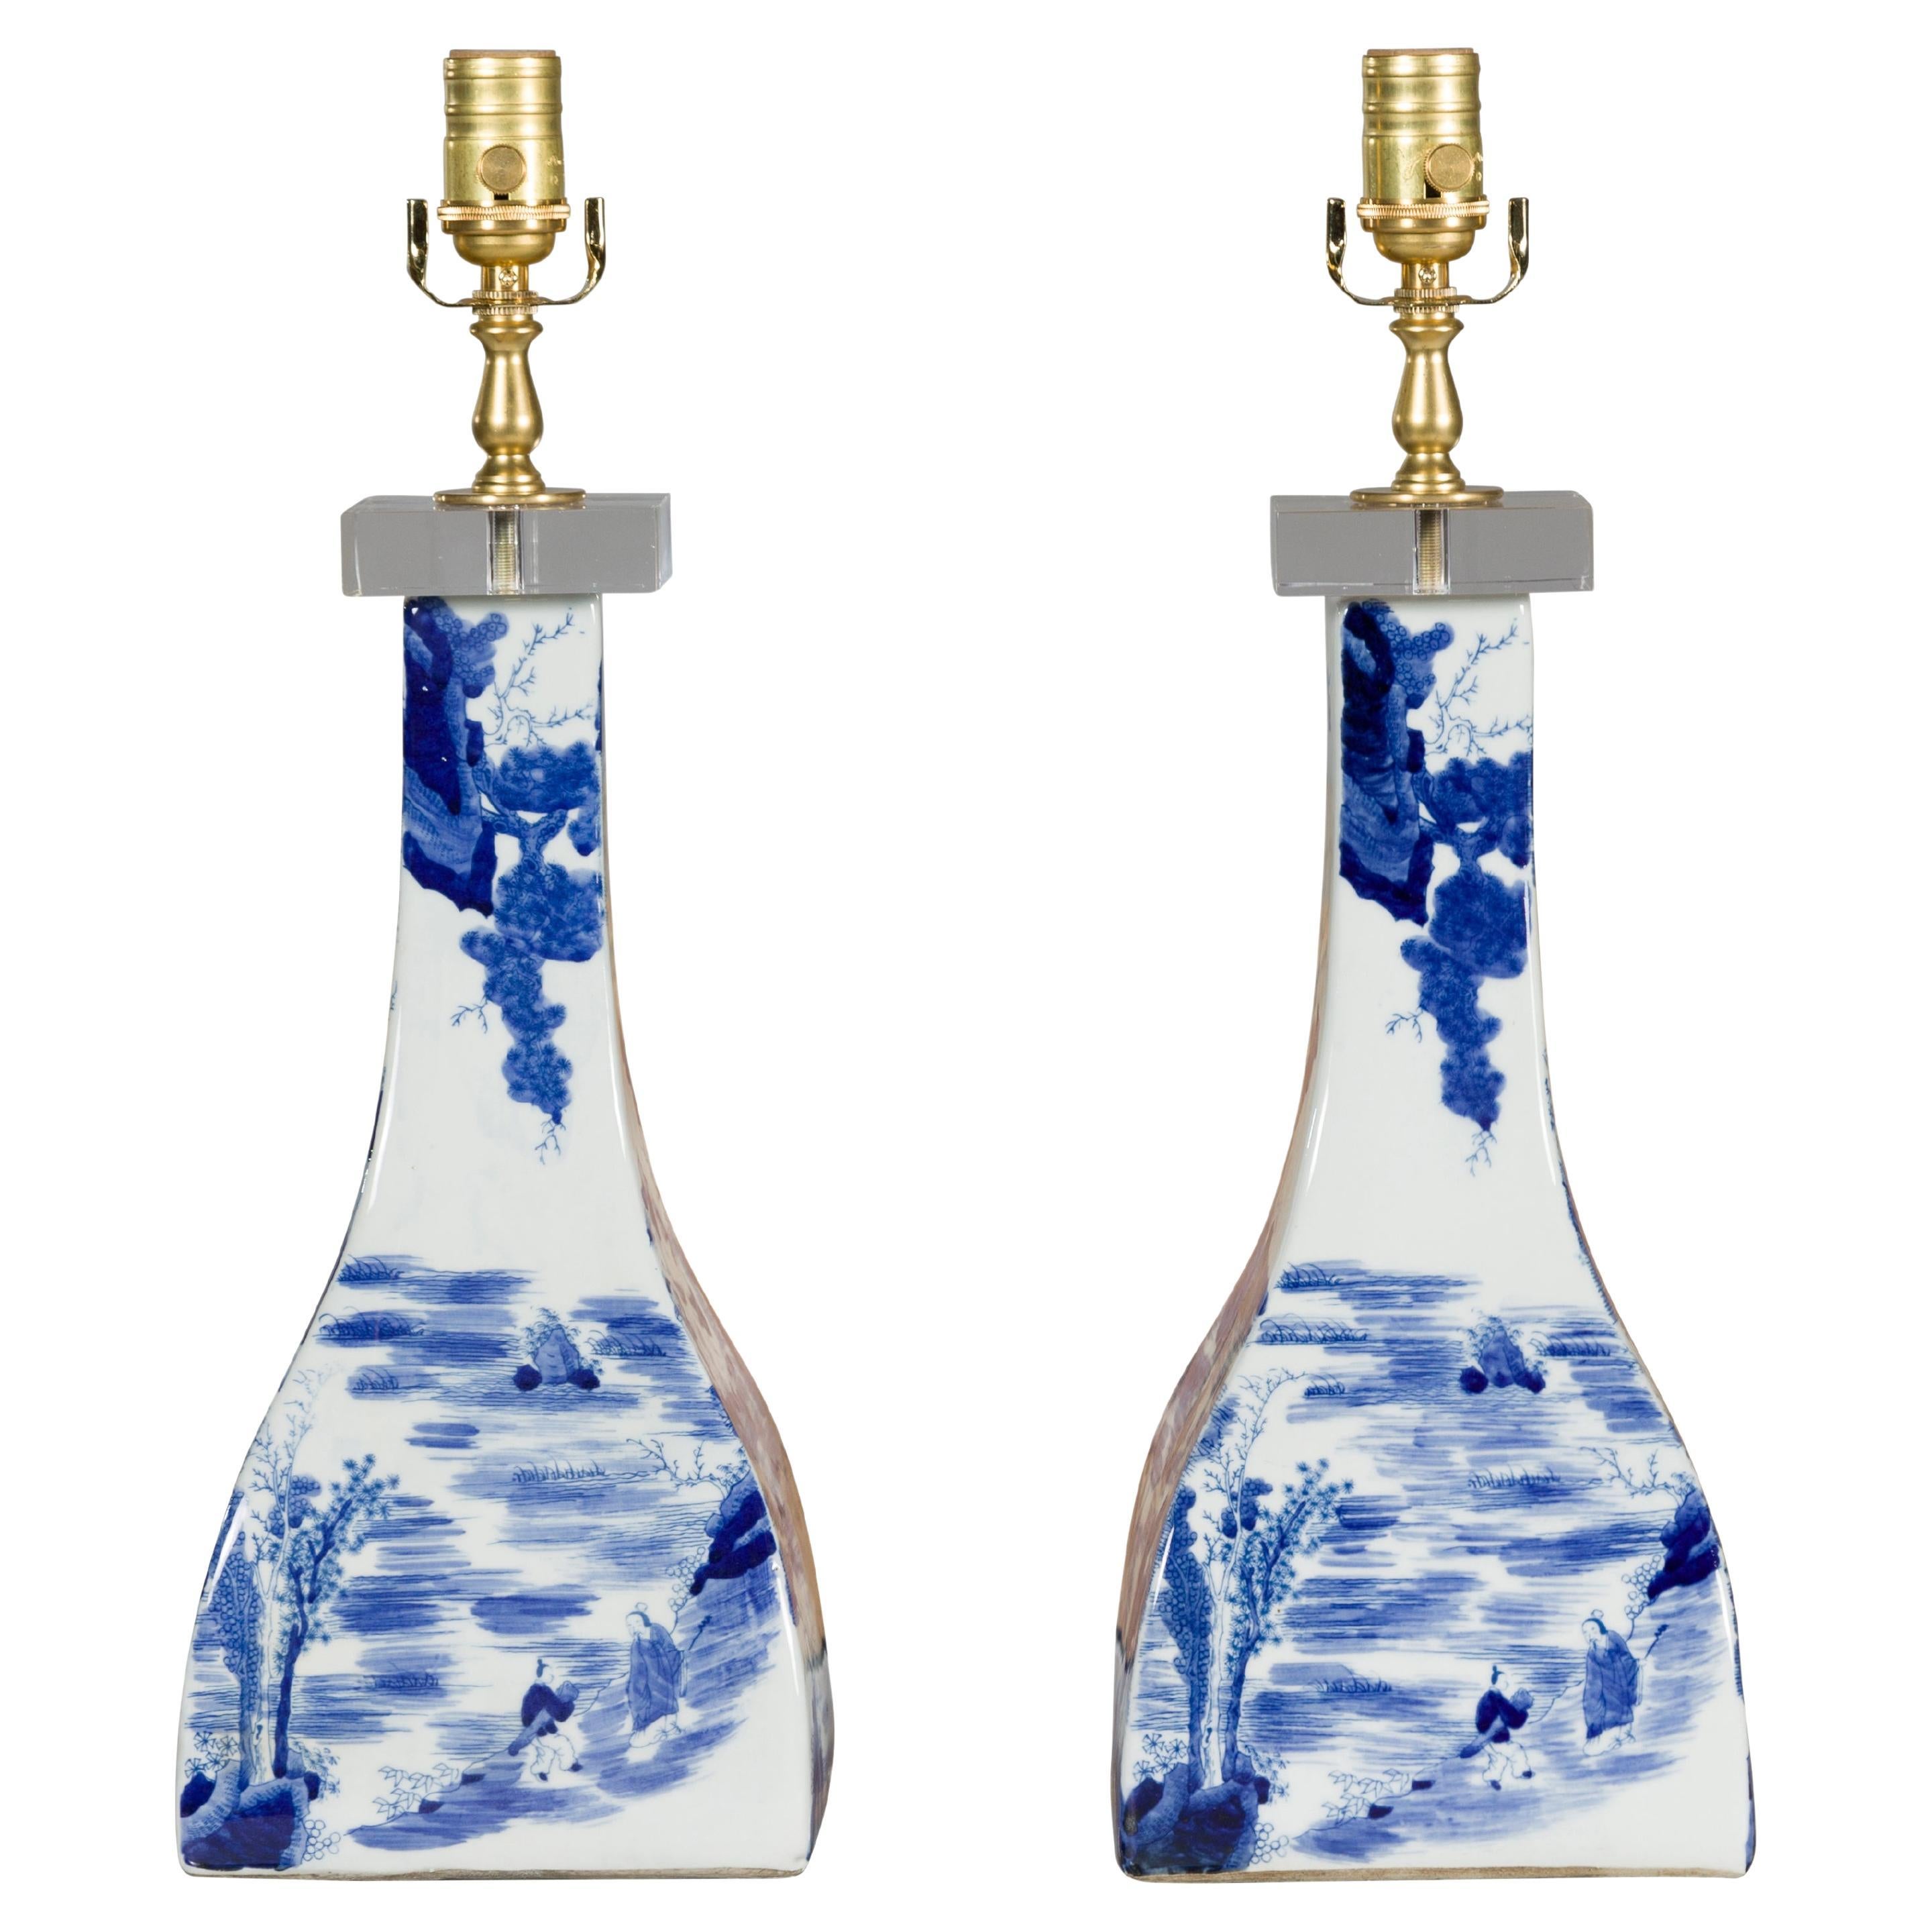 A pair of Asian blue and white porcelain table lamps mounted on custom lucite bases. Introducing a resplendent pair of Asian blue and white porcelain table lamps, masterfully mounted on custom lucite bases that effortlessly merge traditional